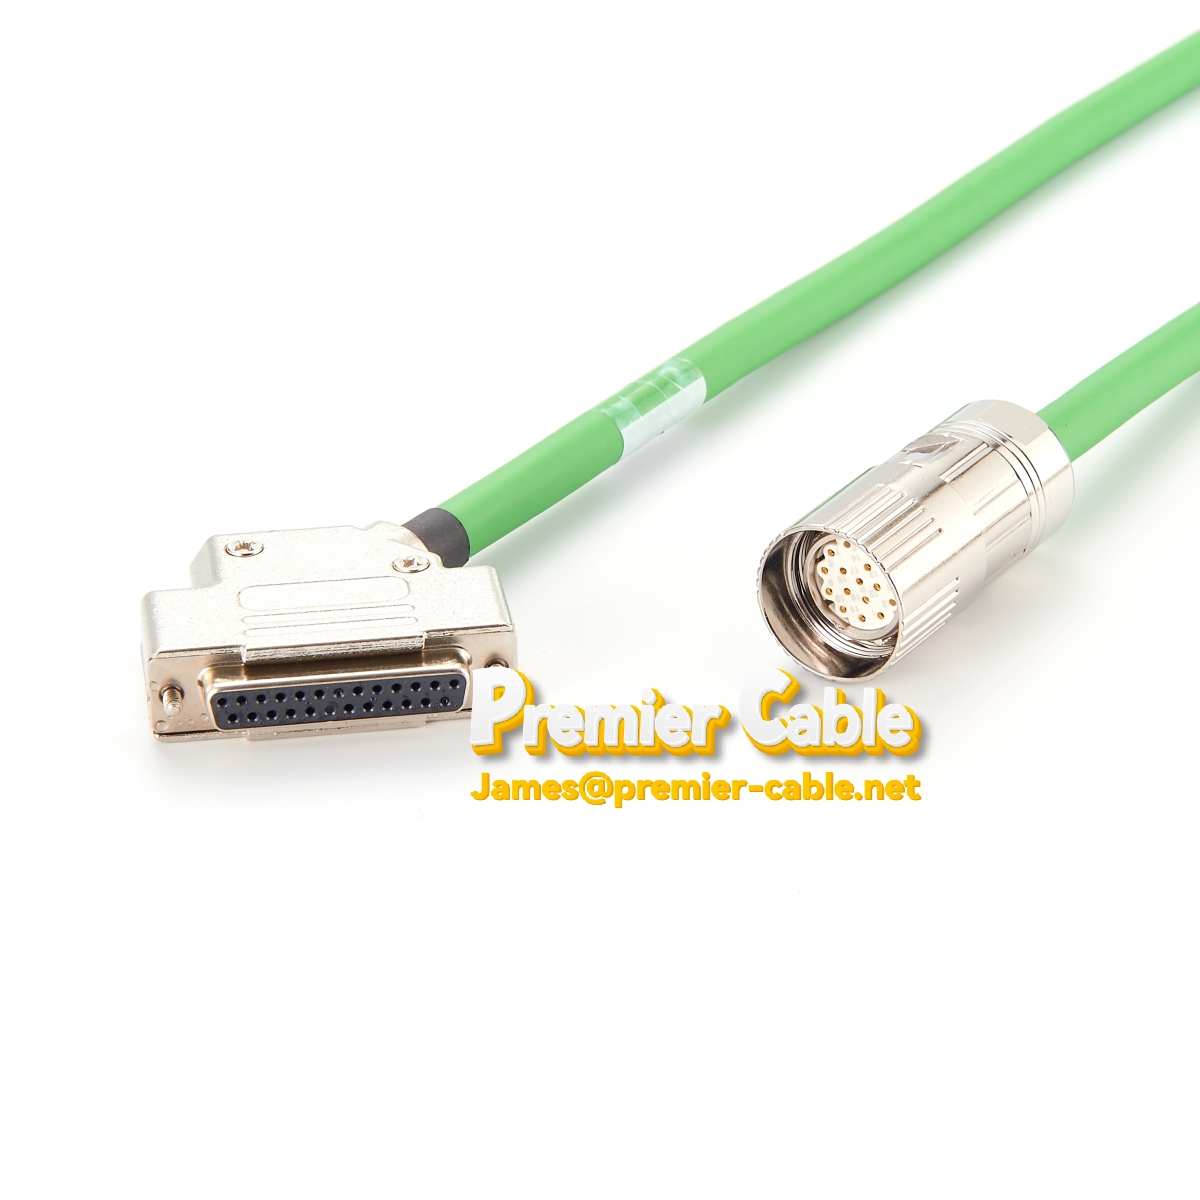 Pre-Assembled Signal Cable for SMC20 Sensor Module to Absolute Encoder